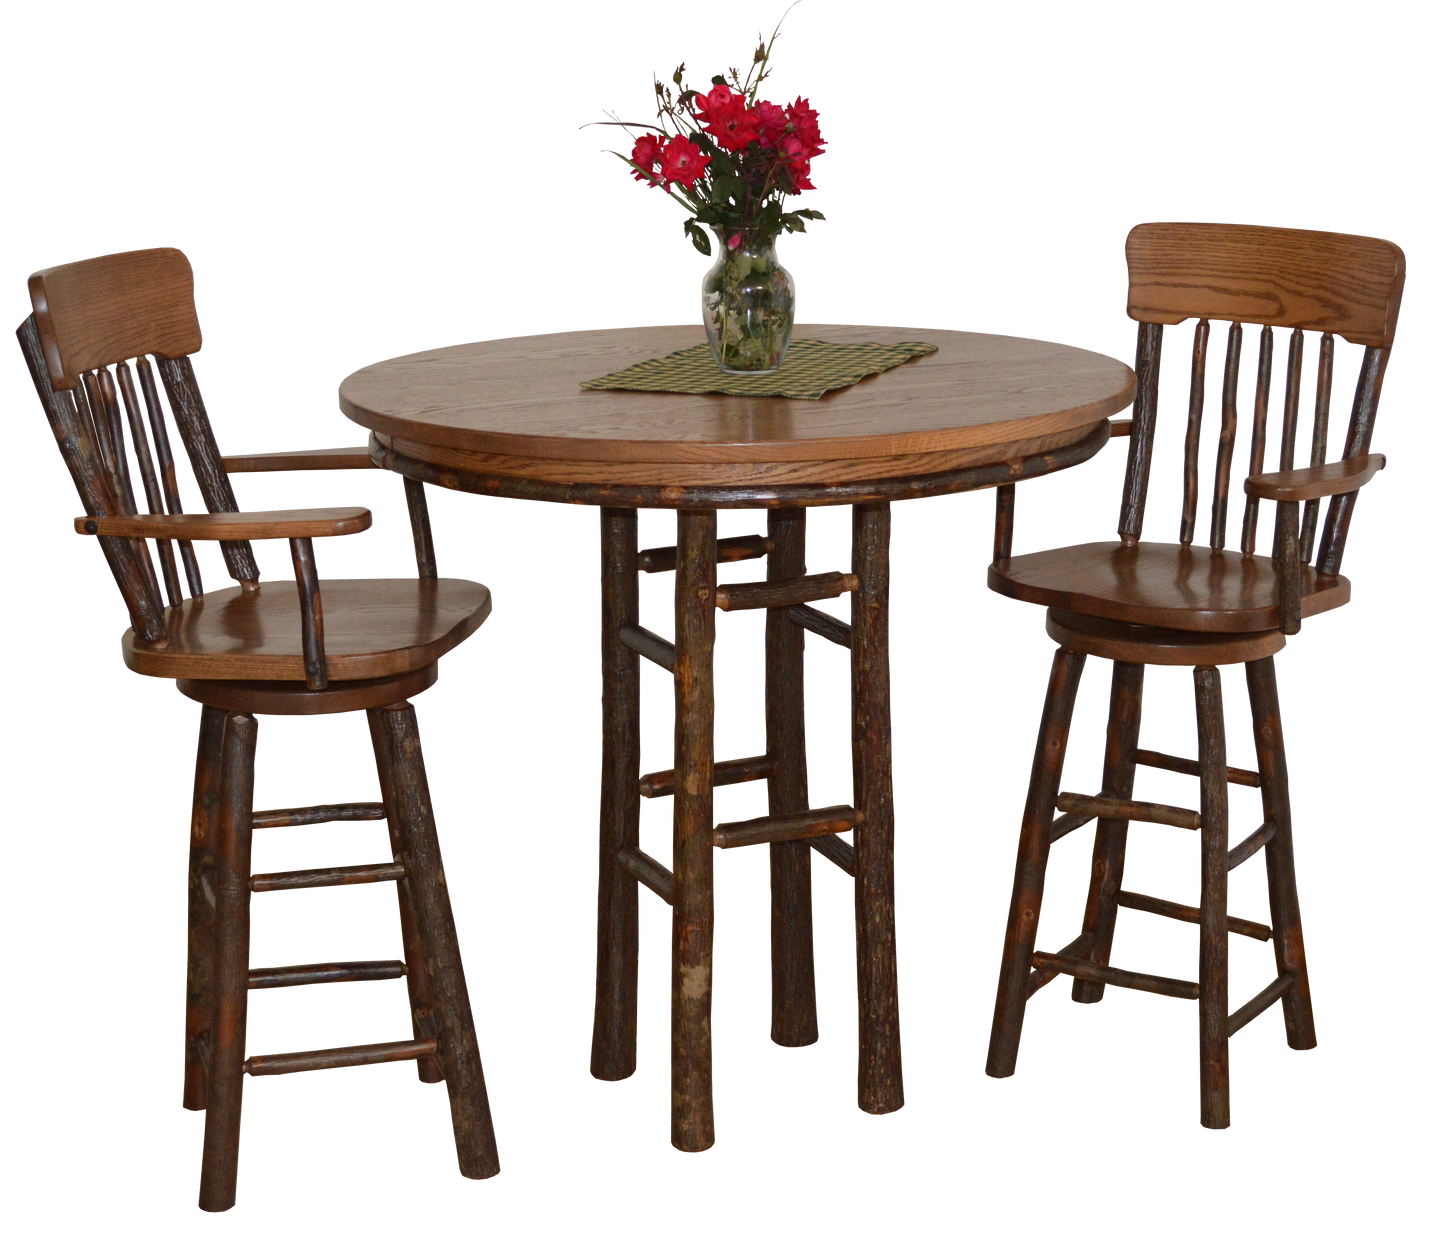 A&L Furniture Co. Hickory 3 Piece Bar table with Hickory Panel Back Swivel Barchairs - LEAD TIME TO SHIP 10 BUSINESS DAYS